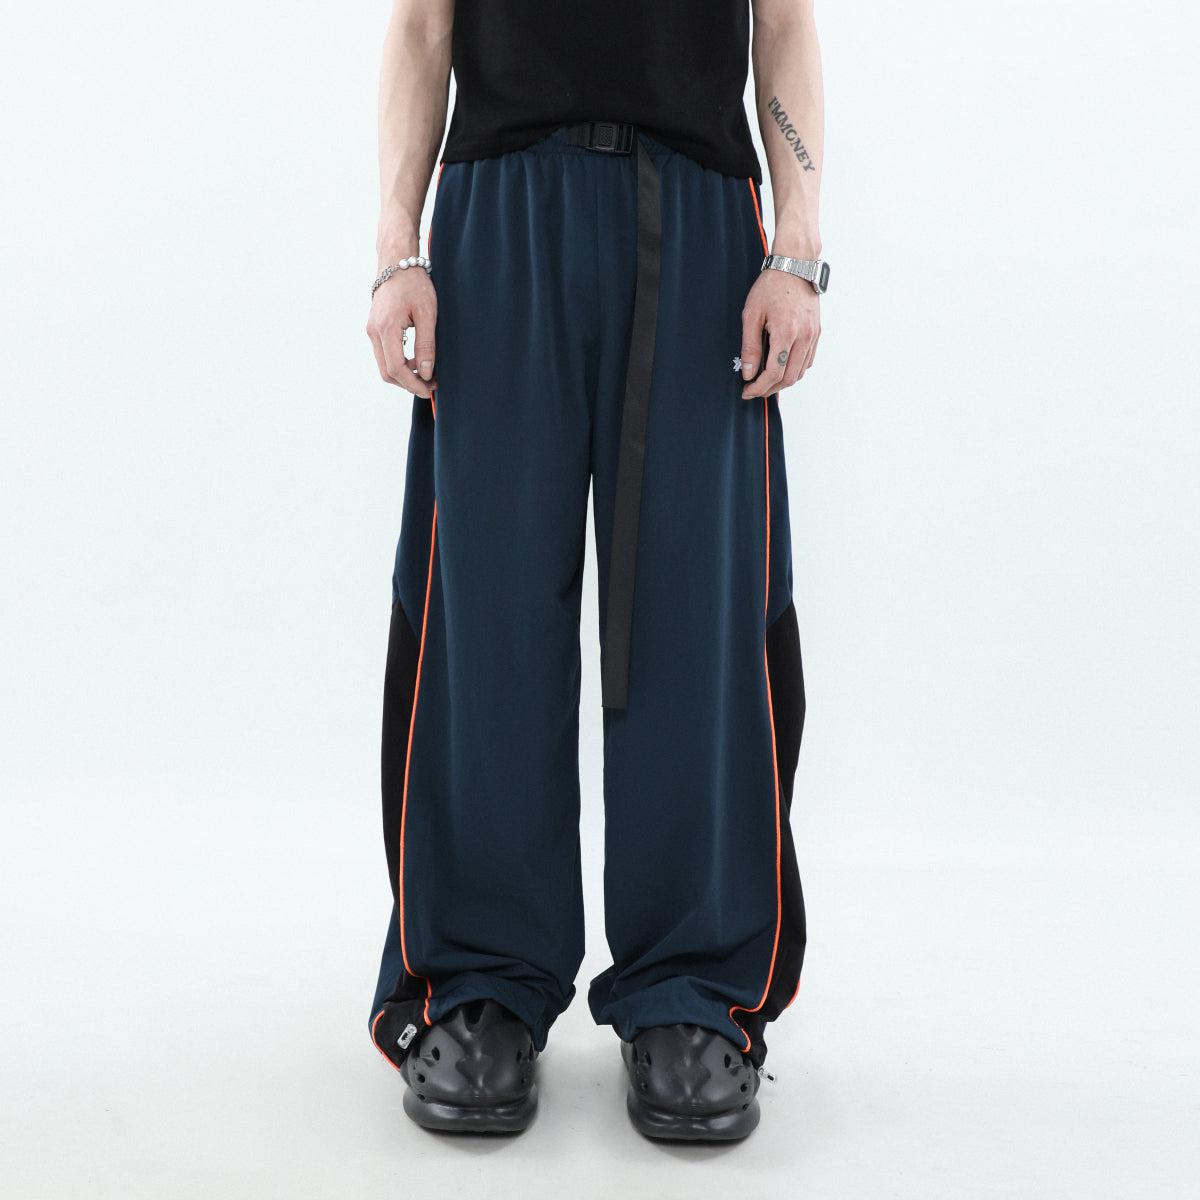 Mr Nearly Casual Buckle Waist Strap Pants Korean Street Fashion Pants By Mr Nearly Shop Online at OH Vault